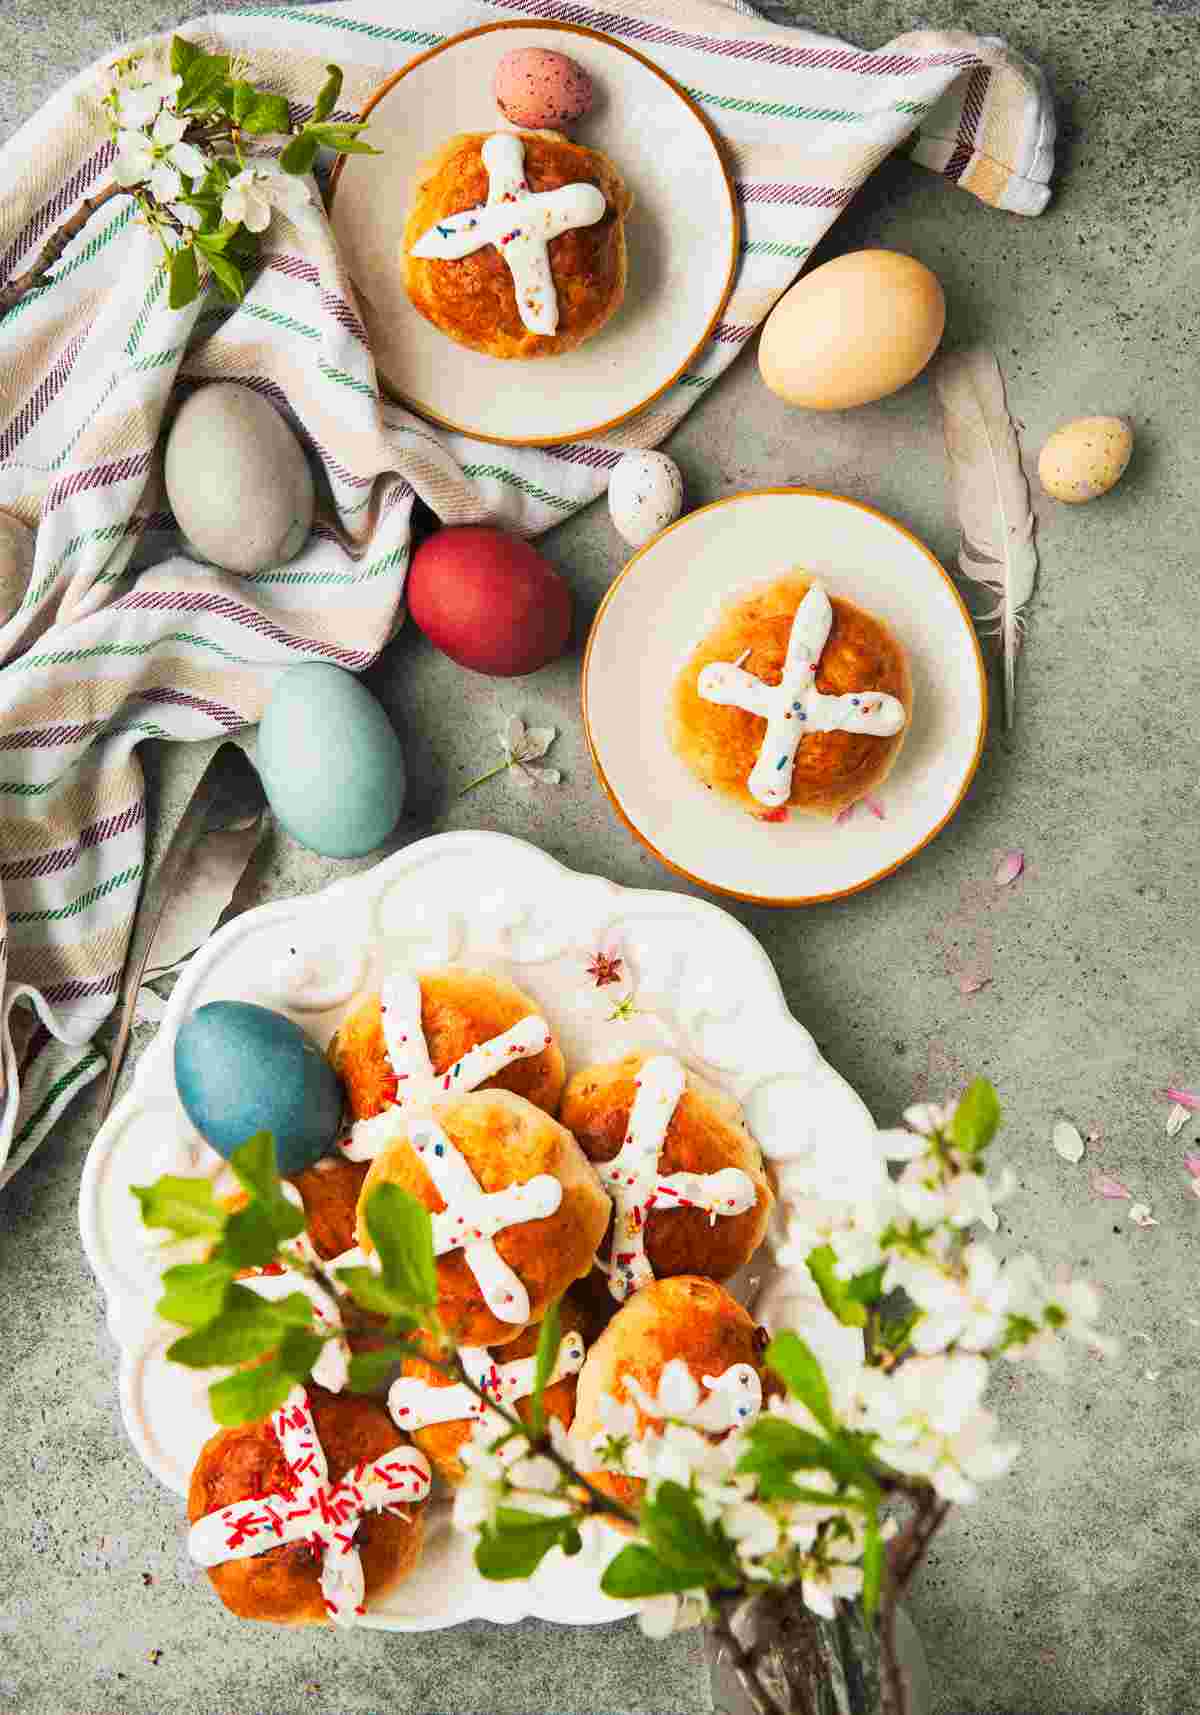 Traditional hot cross buns at Easter on three separate plates, one plate containing multiple hot crossed buns, and the other two plates containing one of the Easter breads each, with Easter eggs, kitchen towels, and Easter flowers surrounding the Easter pastries. 